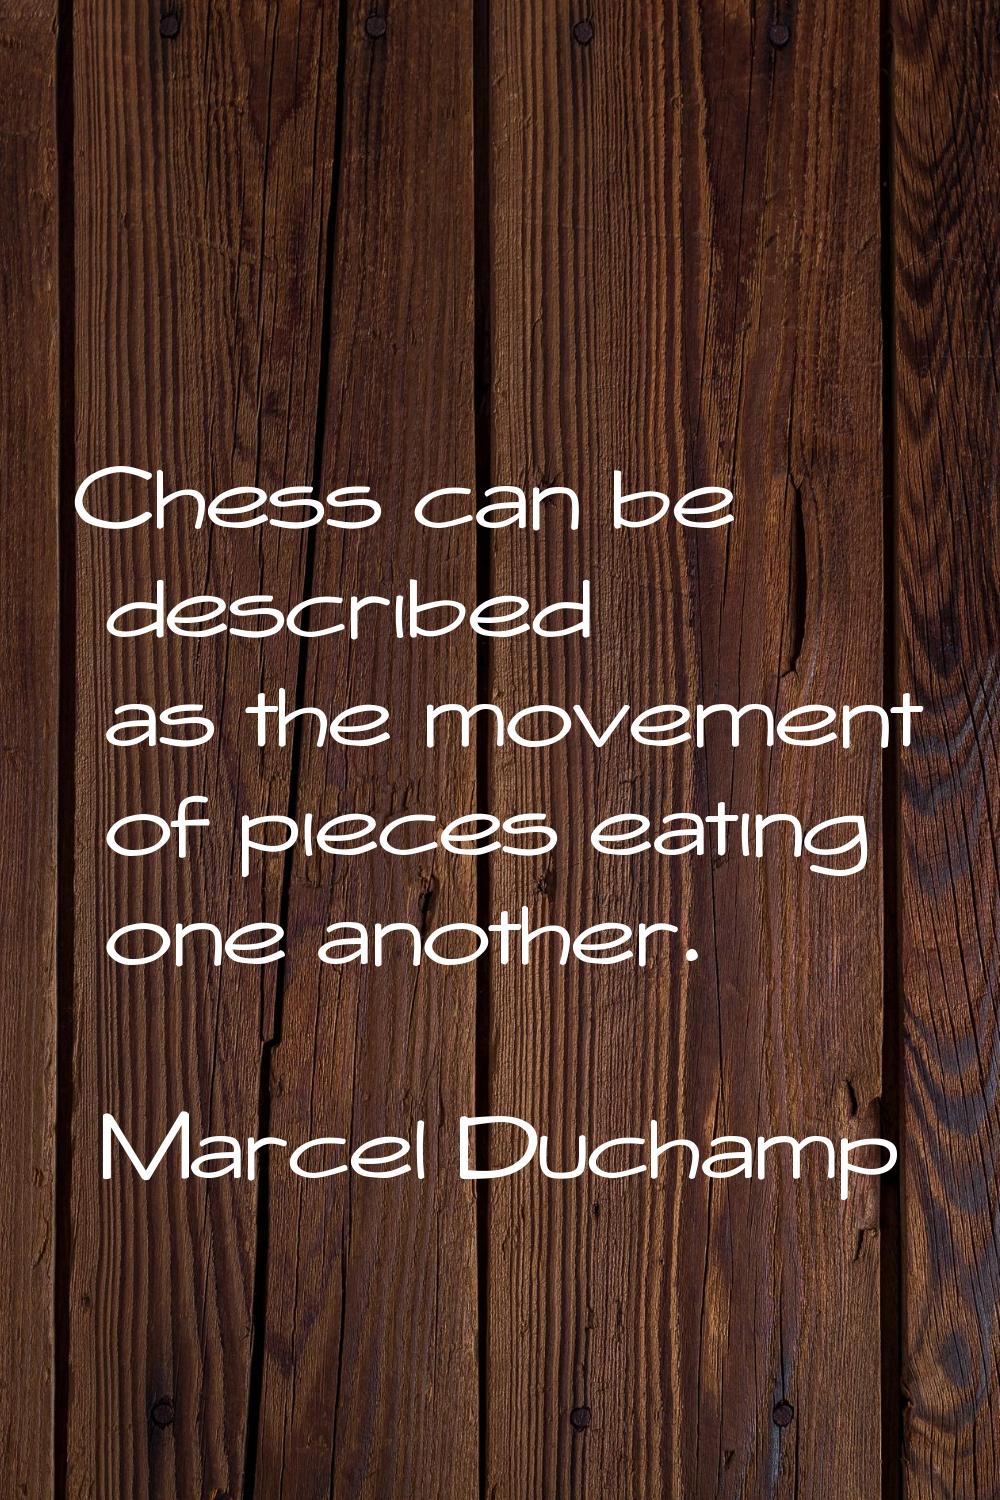 Chess can be described as the movement of pieces eating one another.